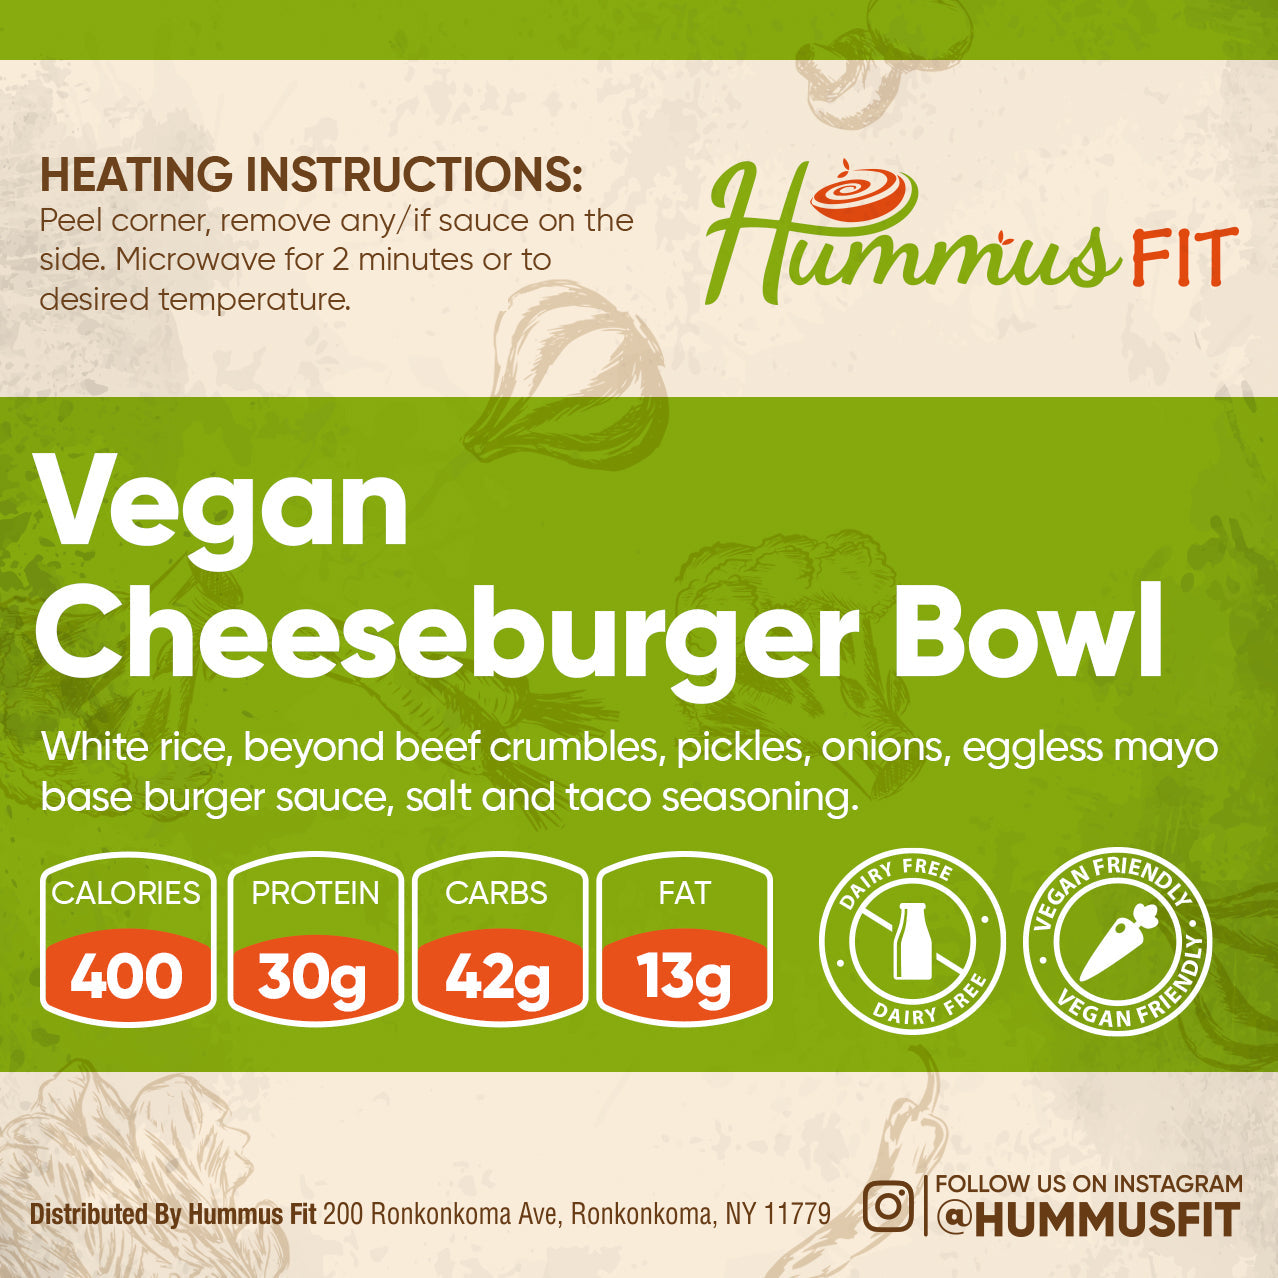 vegan cheeseburger bowl meal delivery service